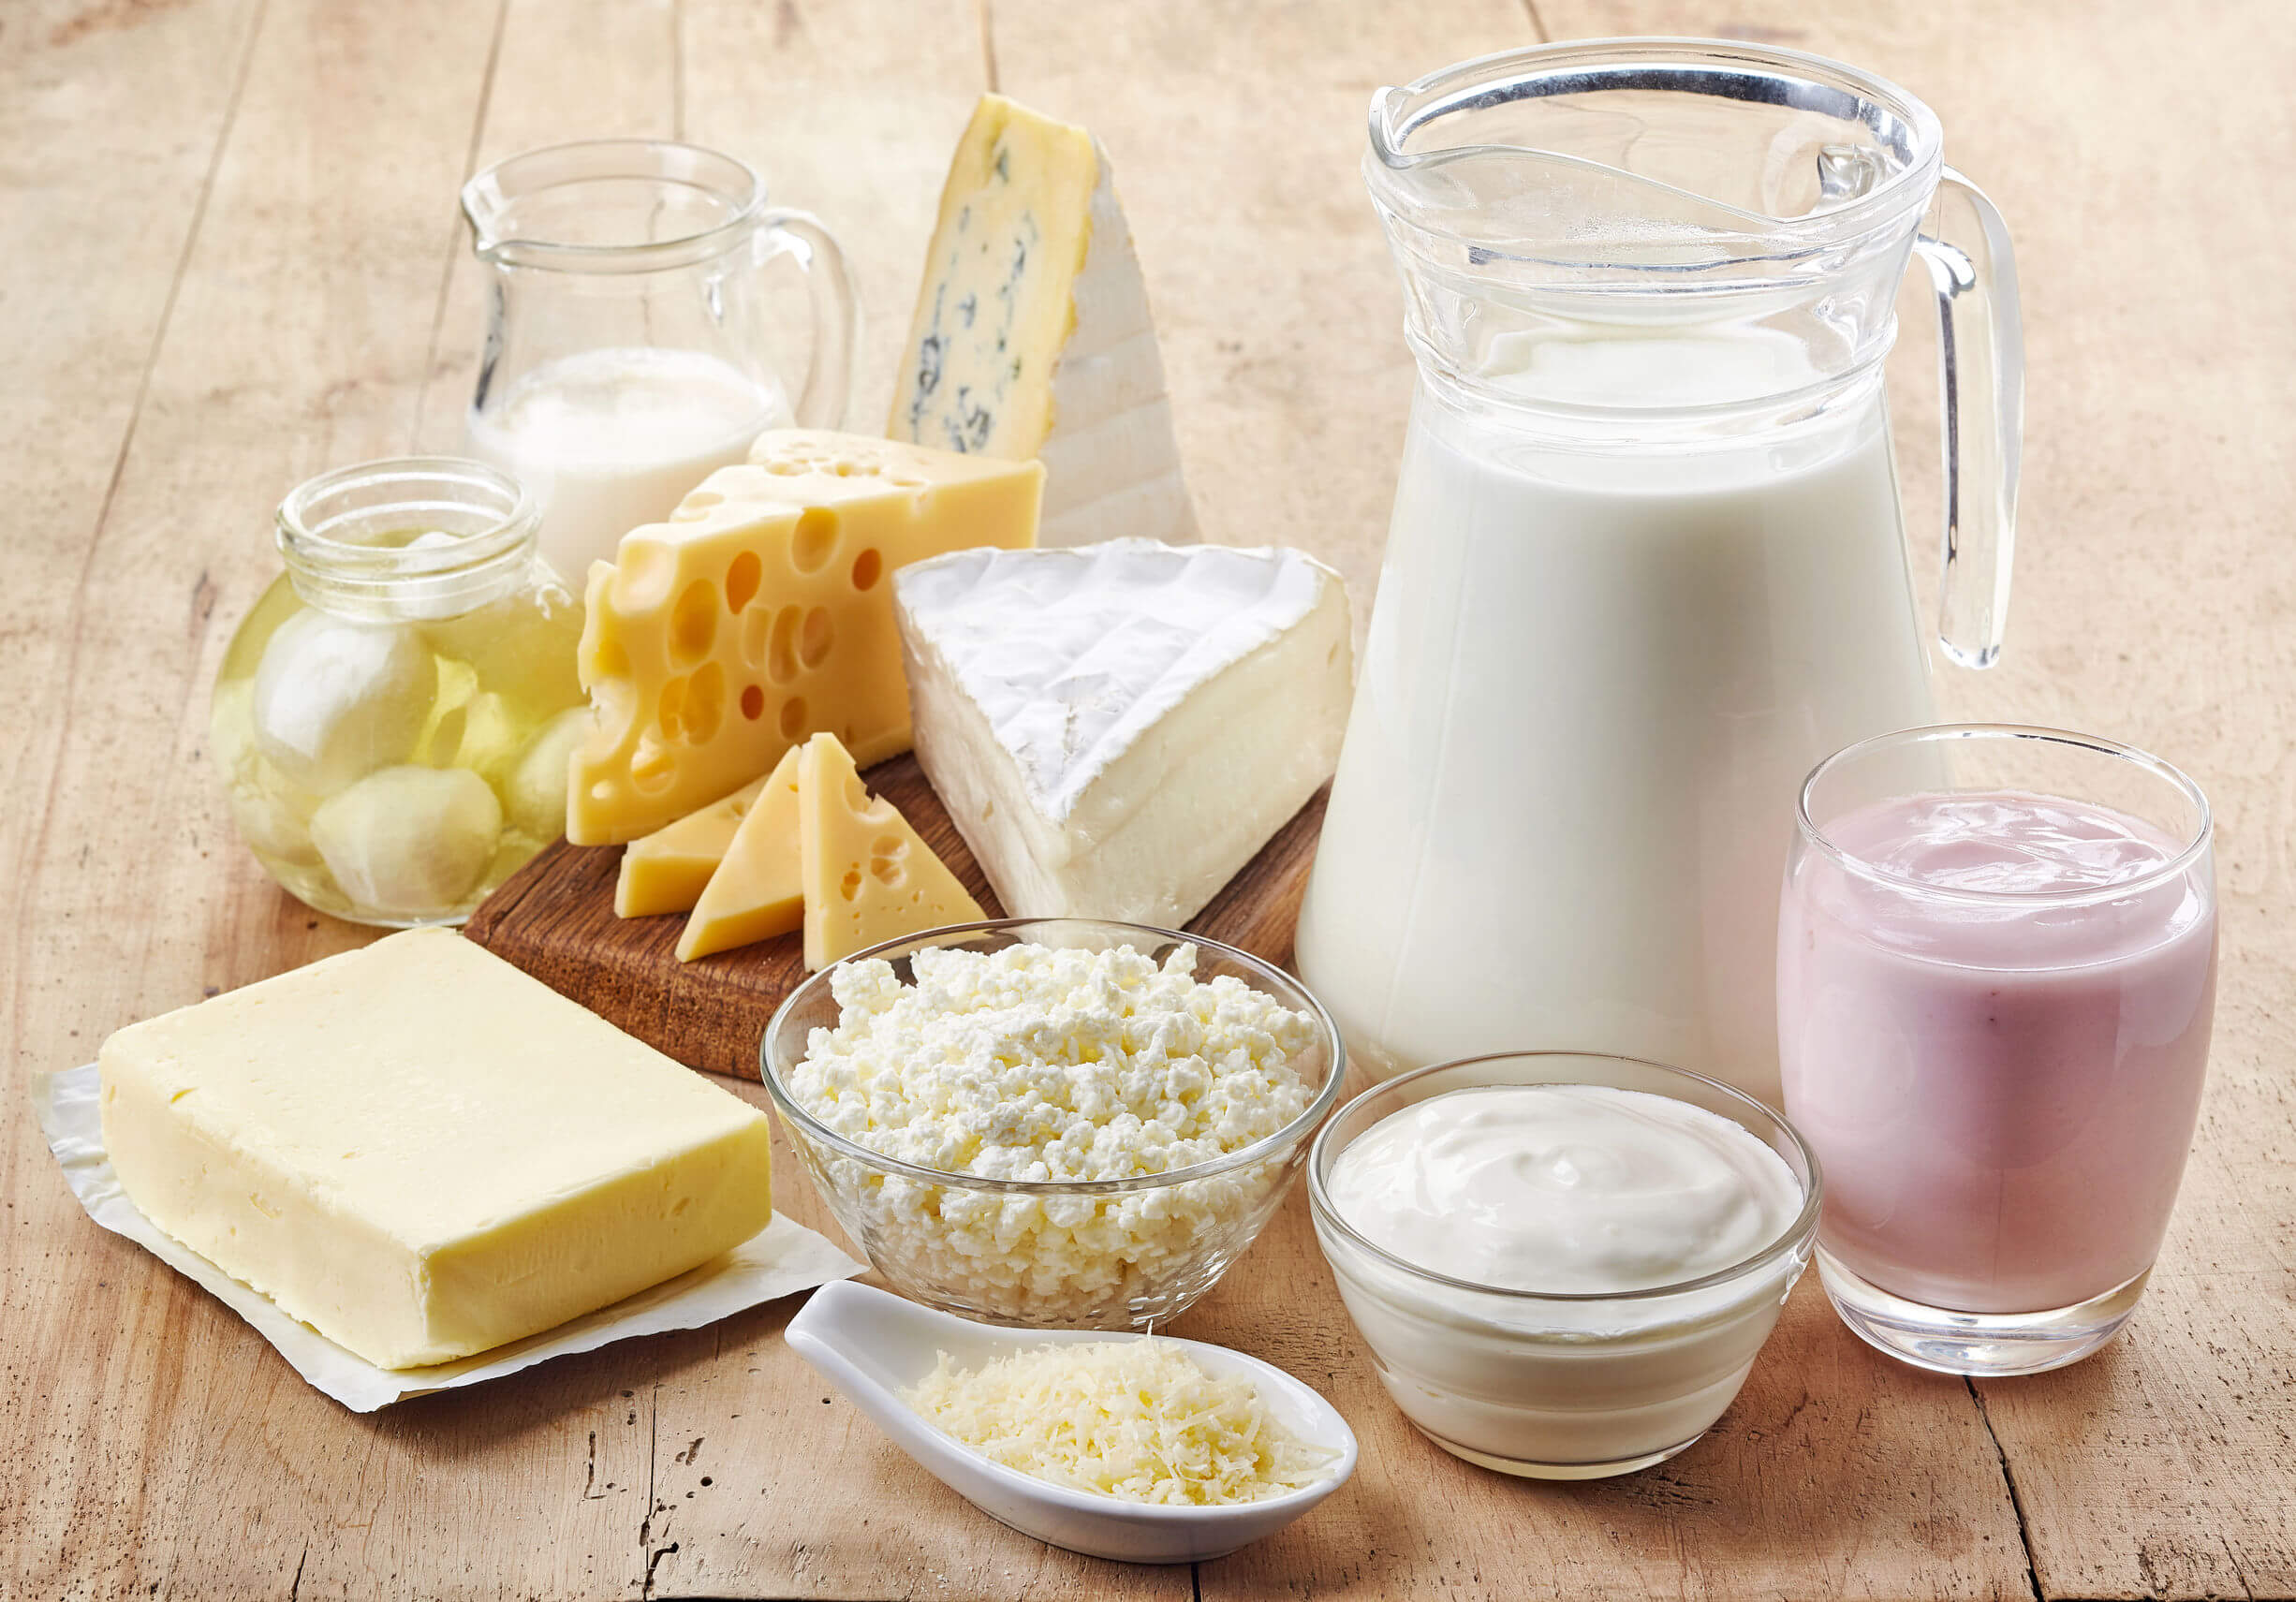 To achieve optimal levels of vitamin D it is important to consume dairy products.